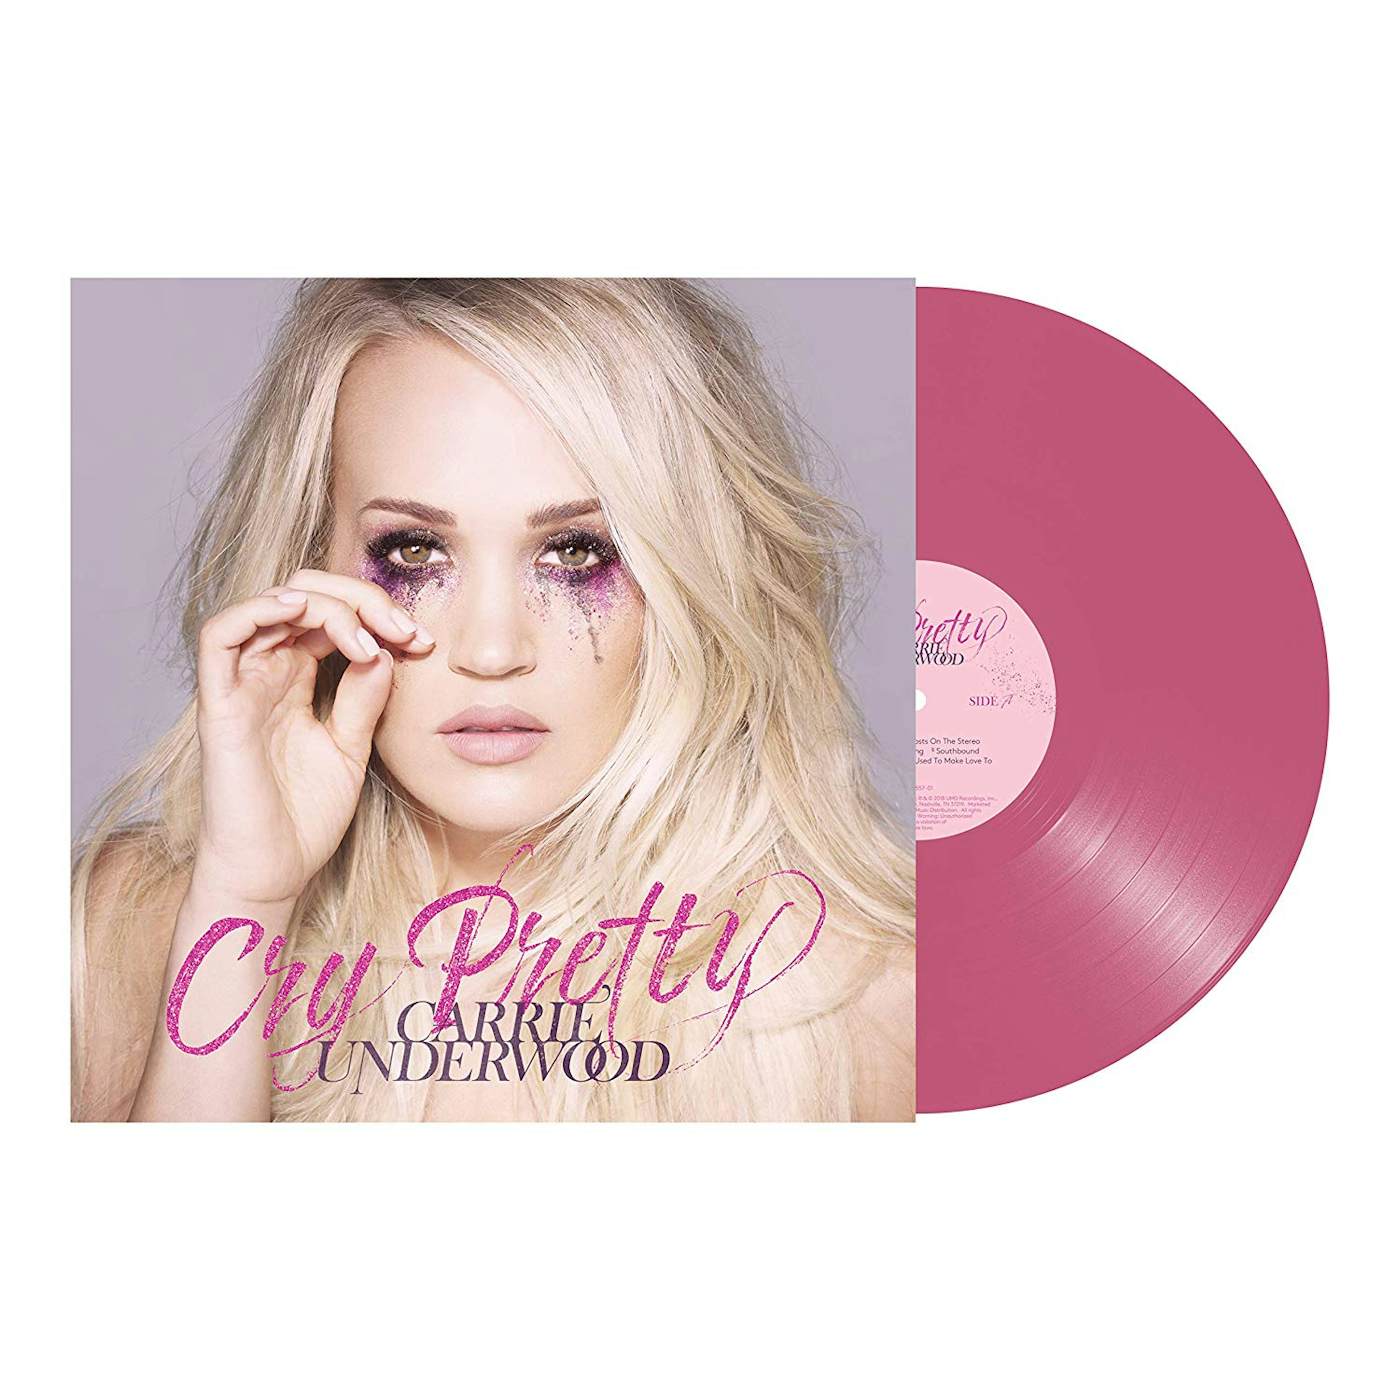 Carrie Underwood CRY PRETTY - Limited Edition Pink Colored LP Vinyl Record